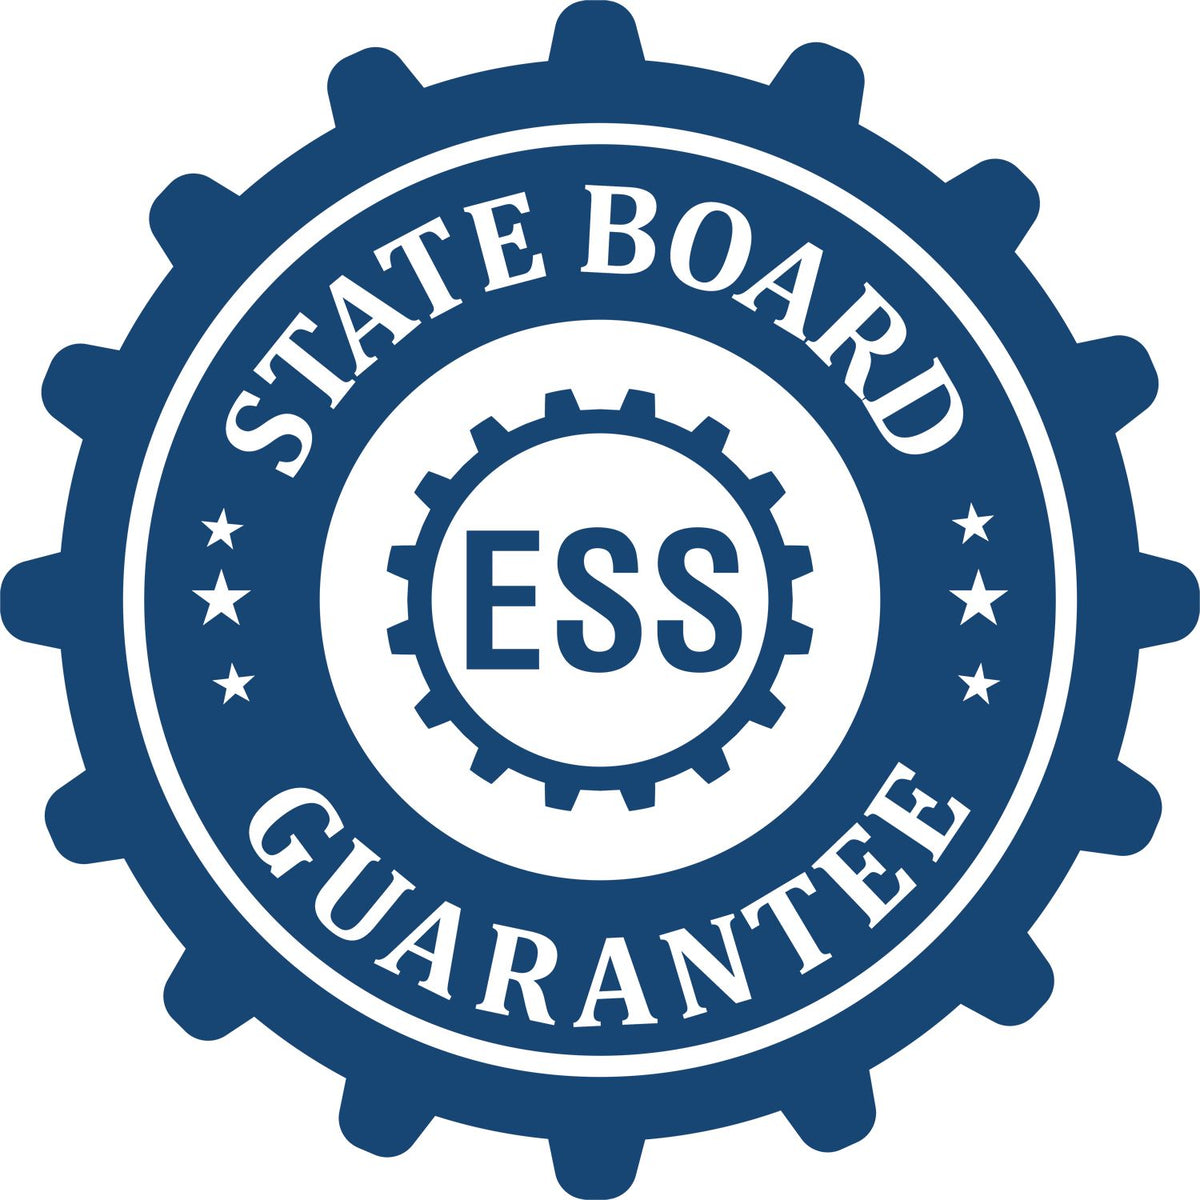 An emblem in a gear shape illustrating a state board guarantee for the Digital Mississippi Geologist Stamp, Electronic Seal for Mississippi Geologist